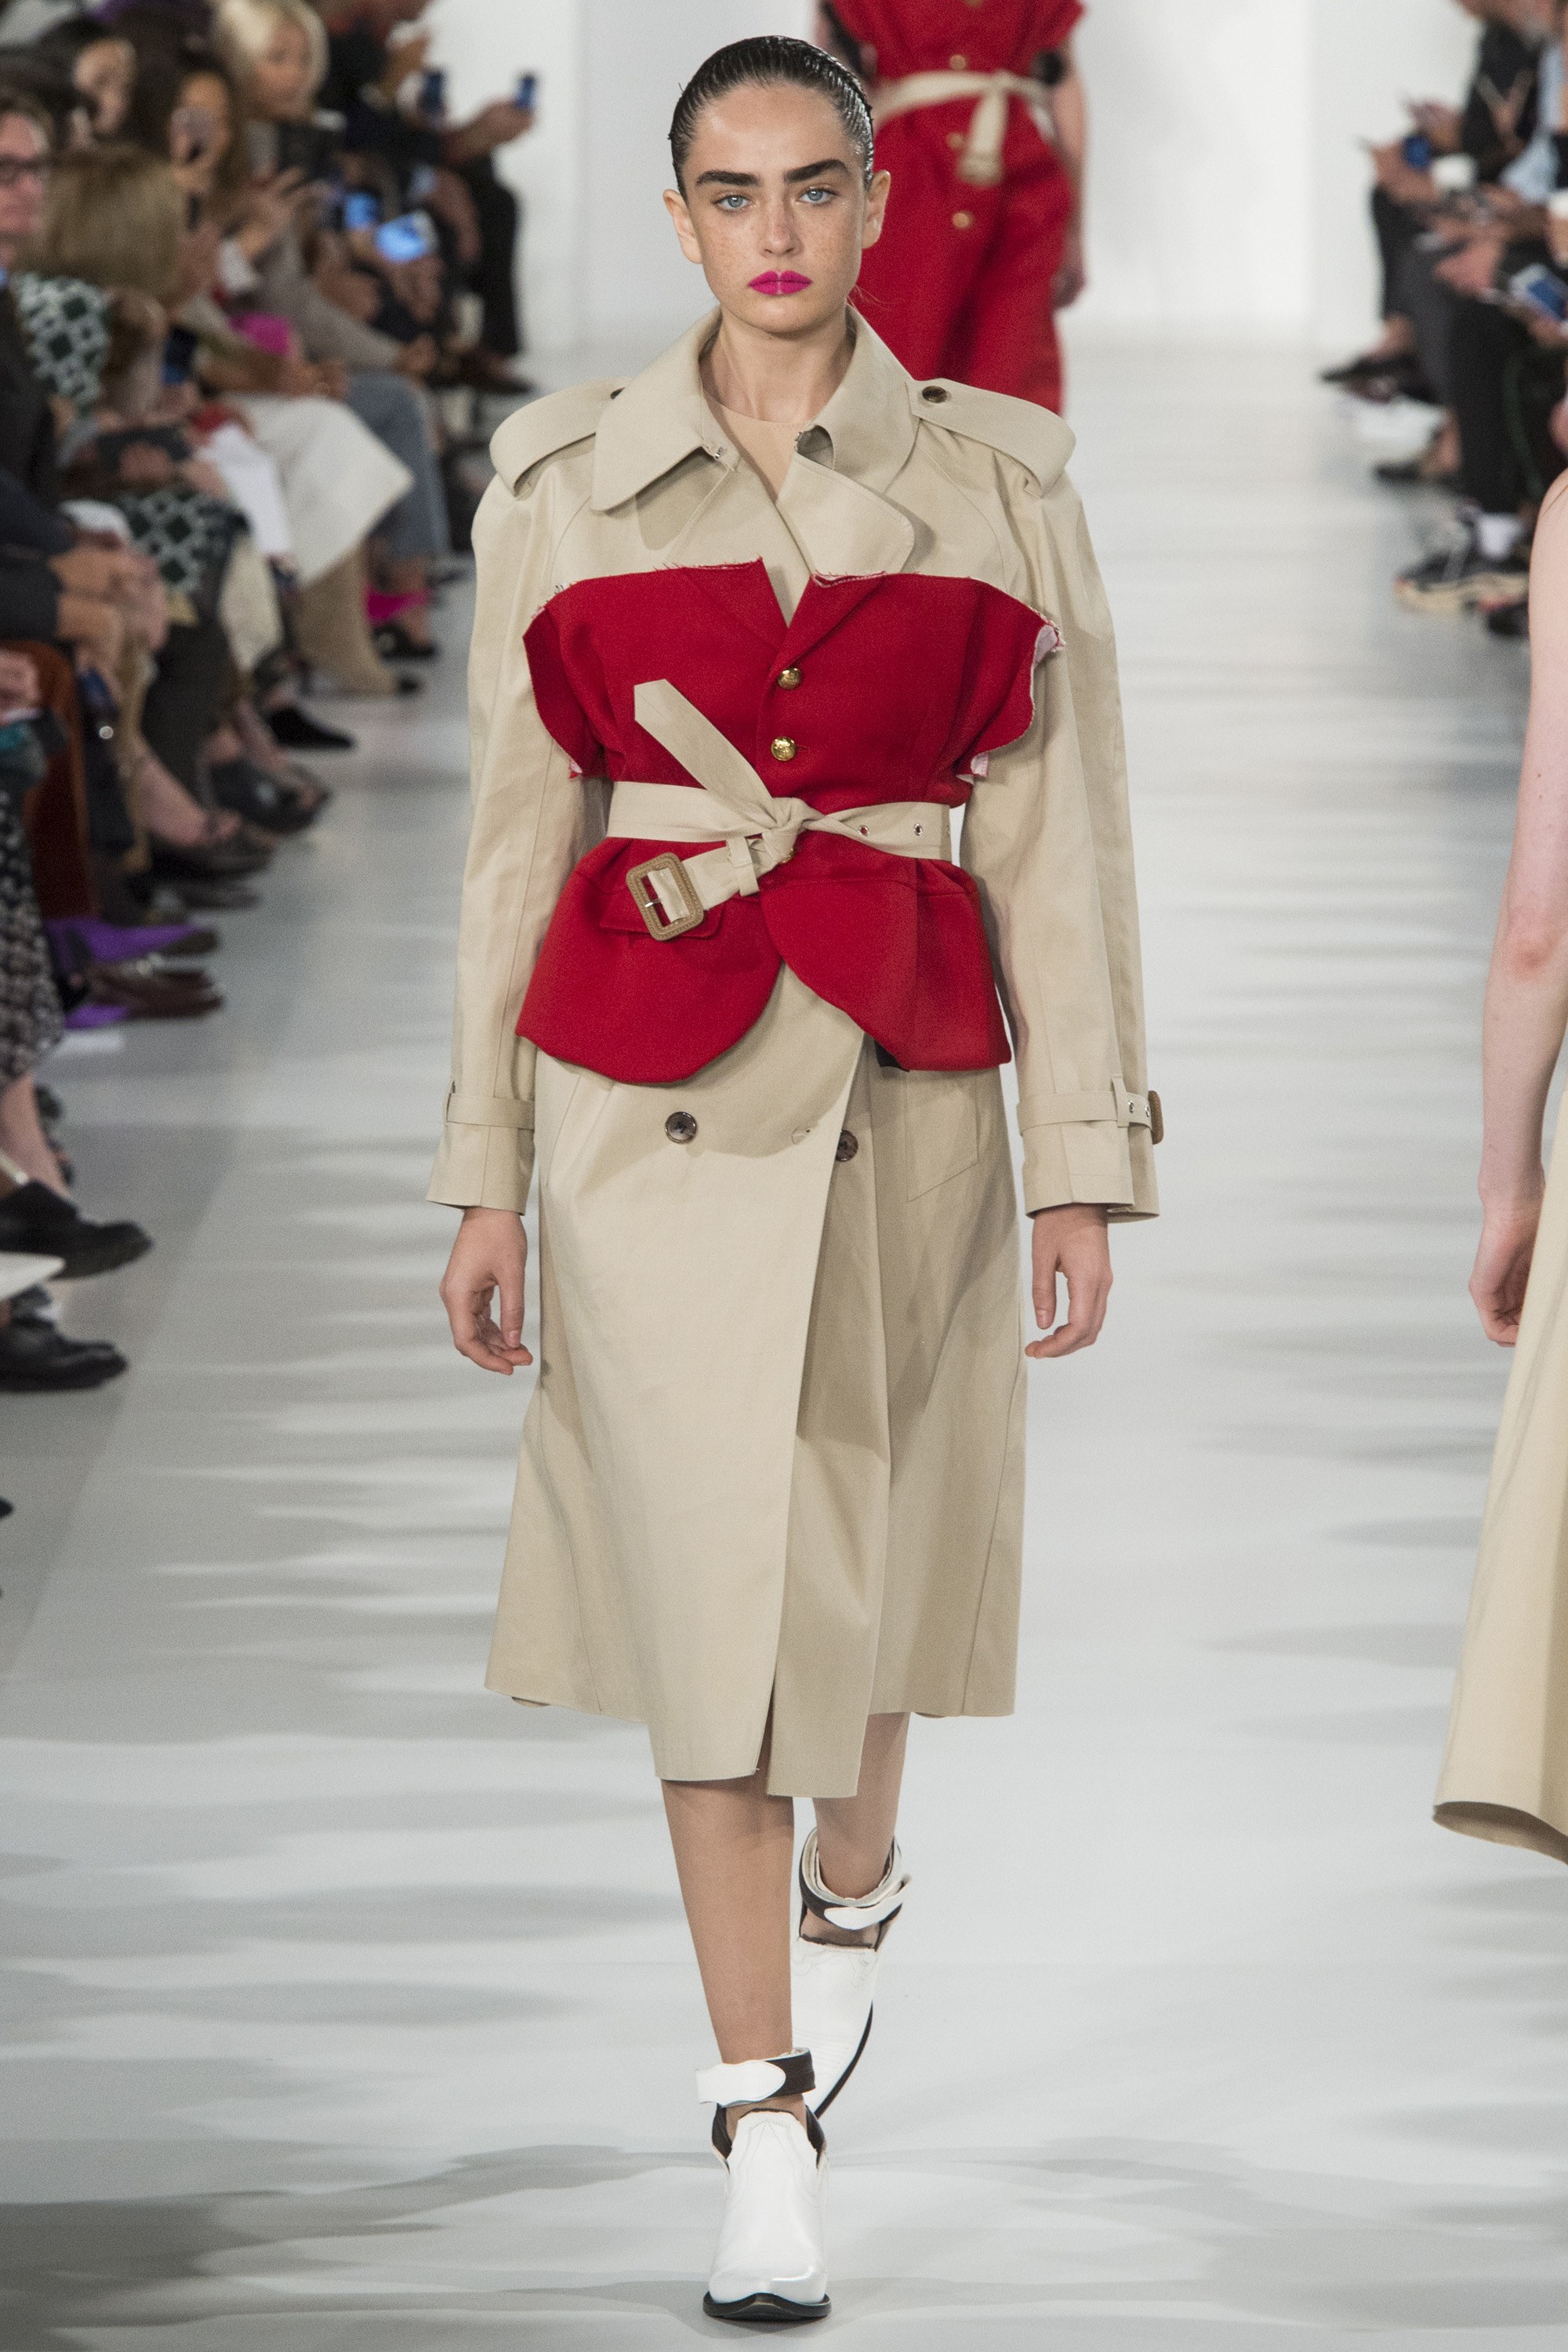 Spring 2018 Runway Fashion Trend – Trench Coats